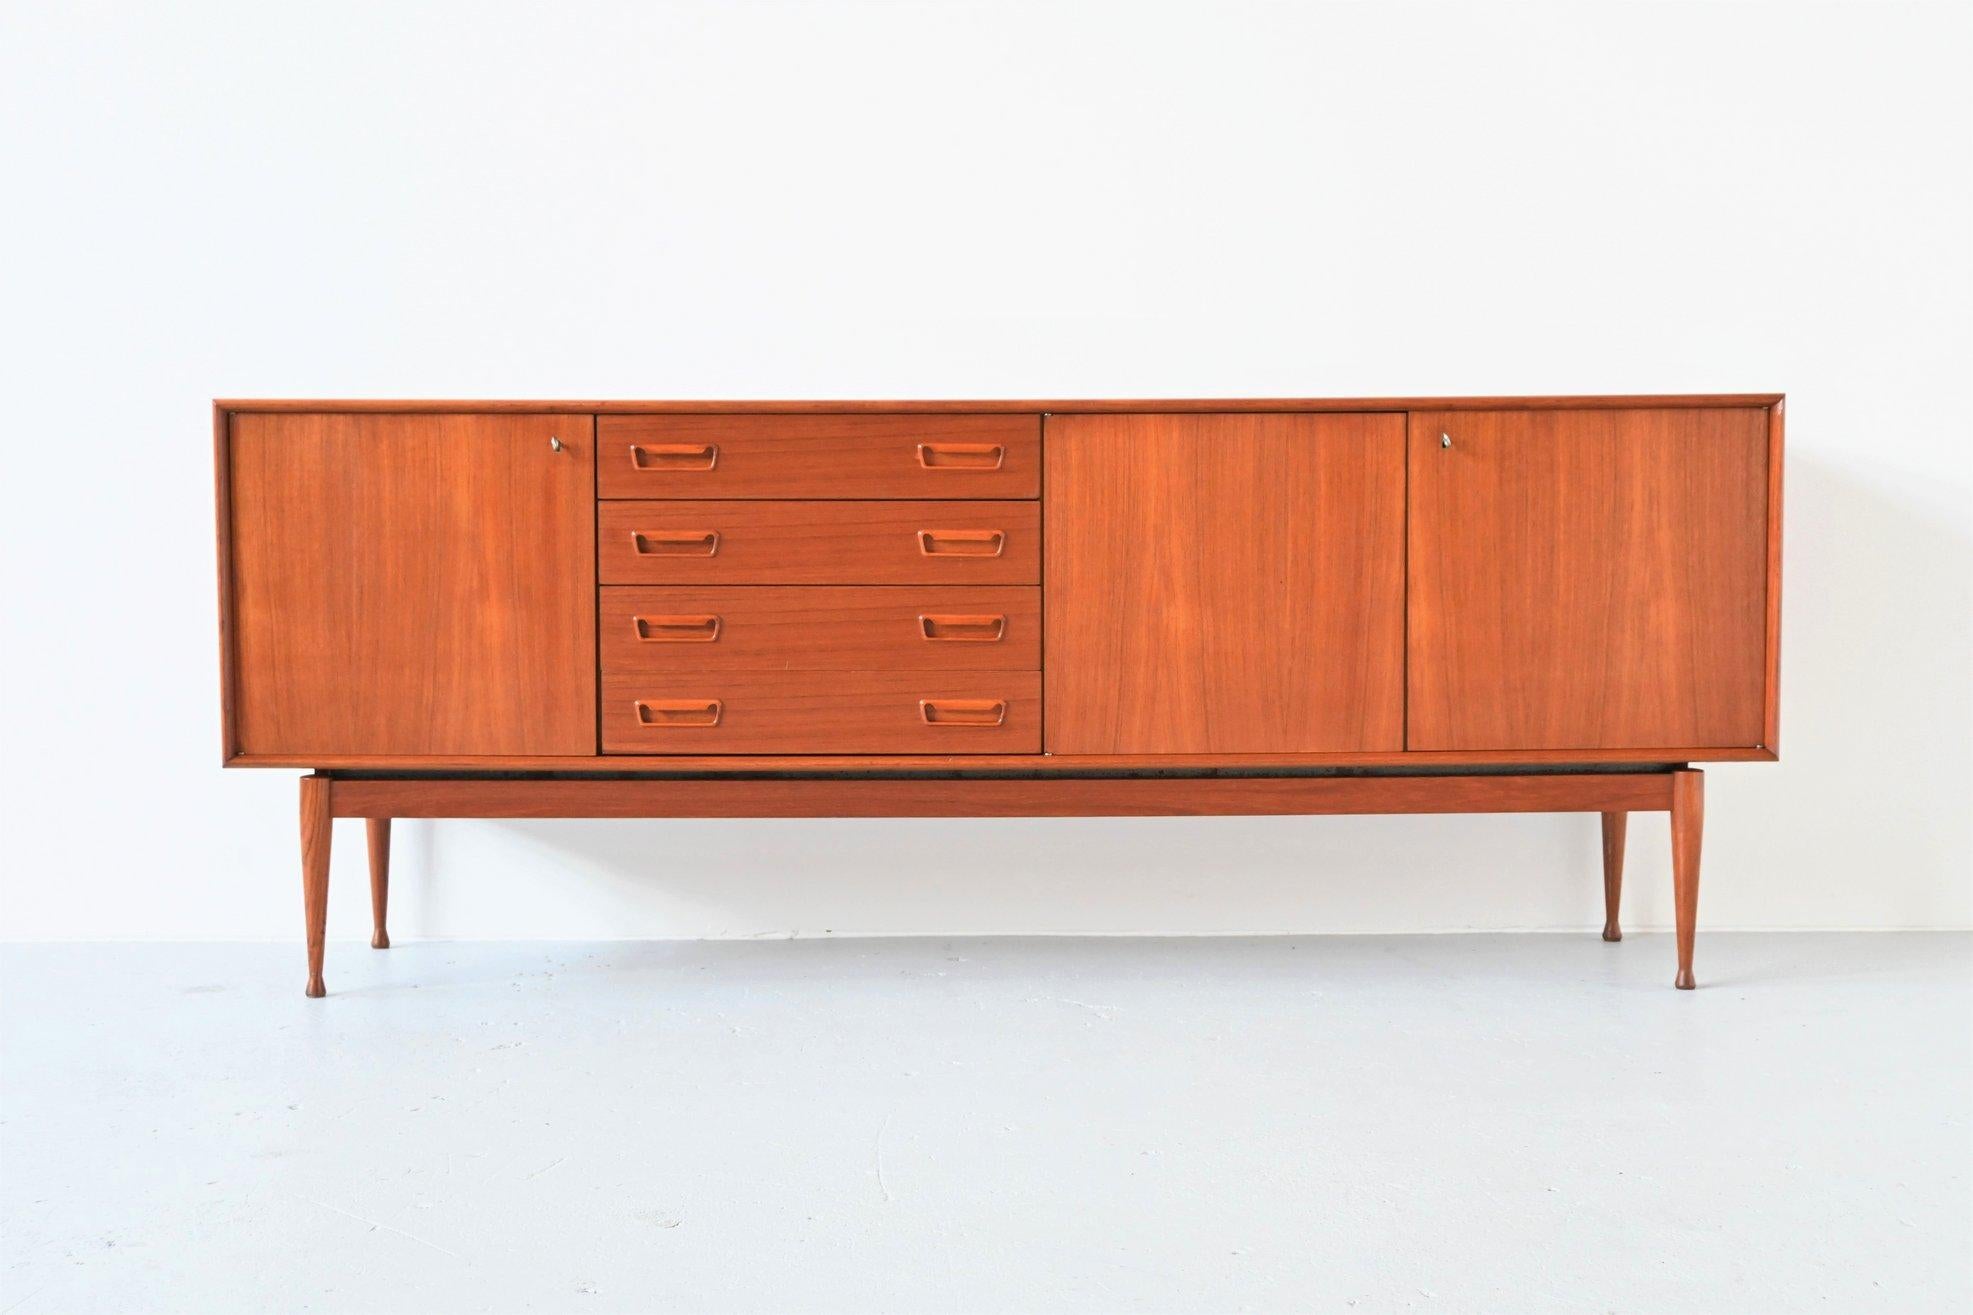 Stunning high quality sideboard designed by Gunnar Nielsen Tibergaard and manufactured by Tibergaard, Denmark 1960. This amazing credenza has a very nice teak grain and is in fully original condition. It’s a very nicely crafted piece of Danish